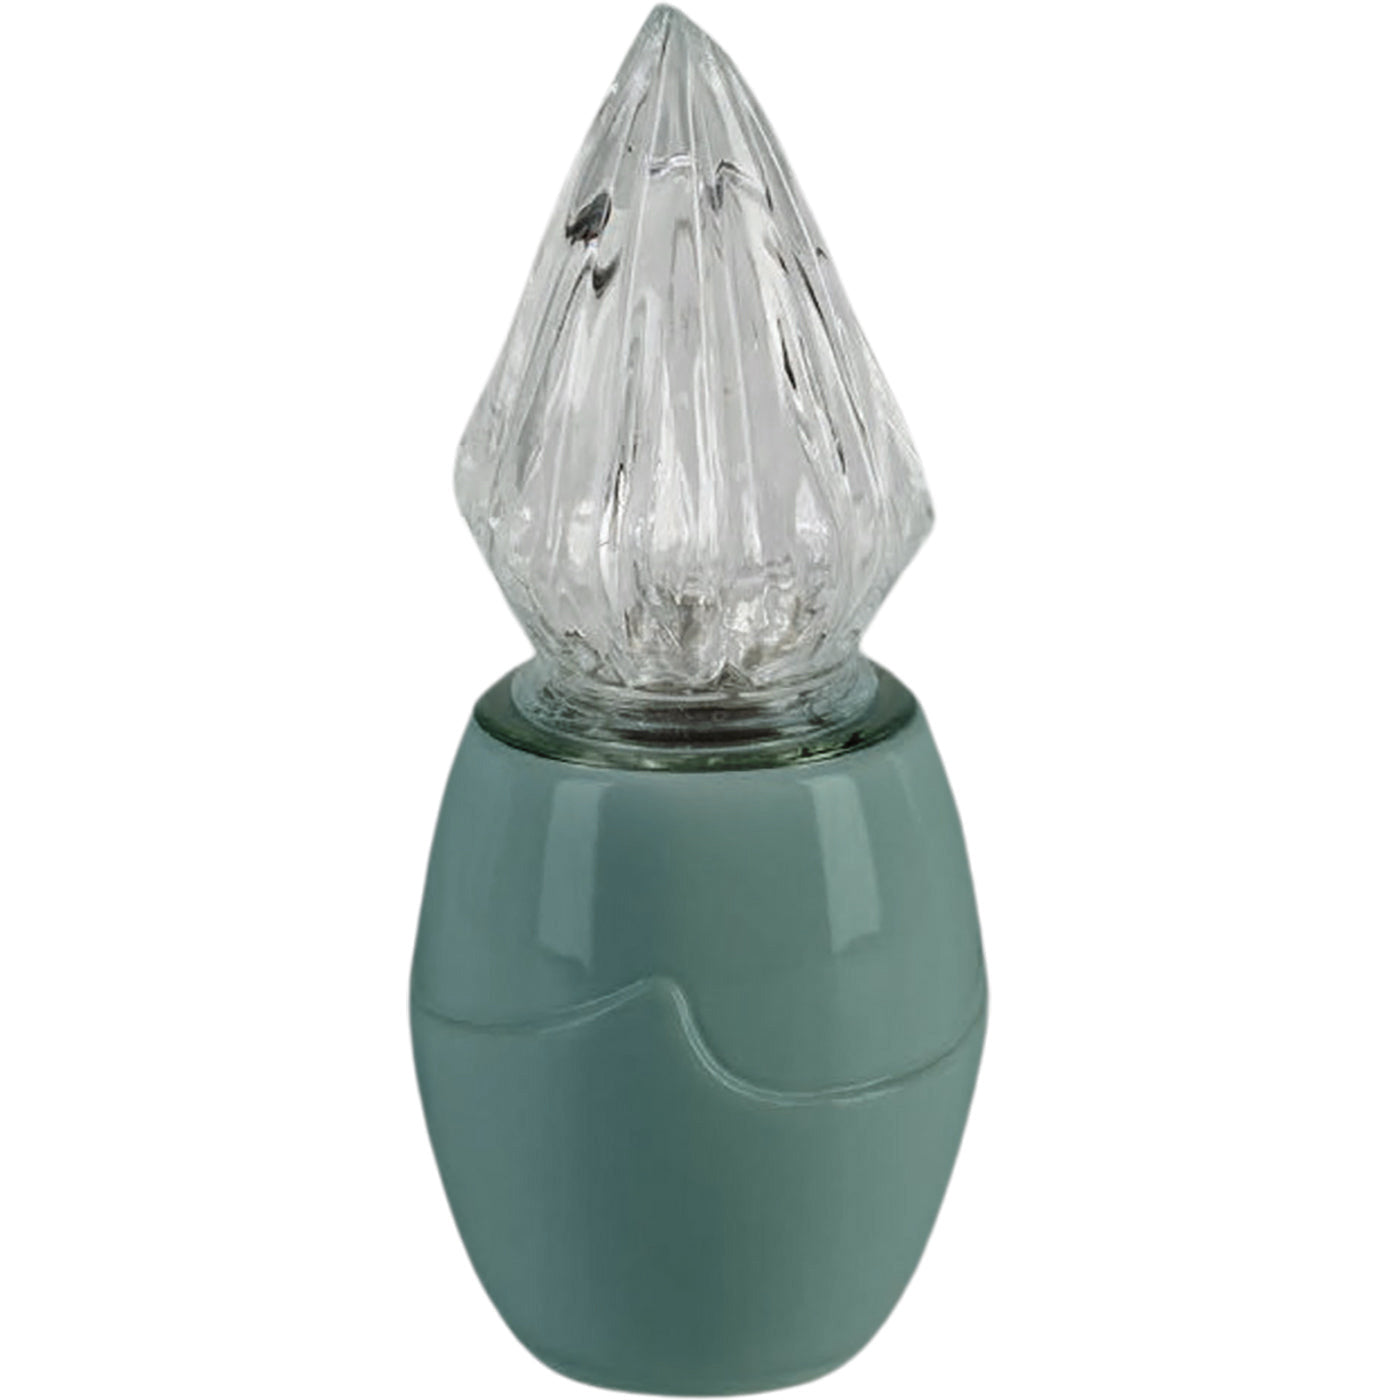 Grave light Onda green 10x10cm - 3.9x3.9in In green porcelain, ground attached ON170T/V